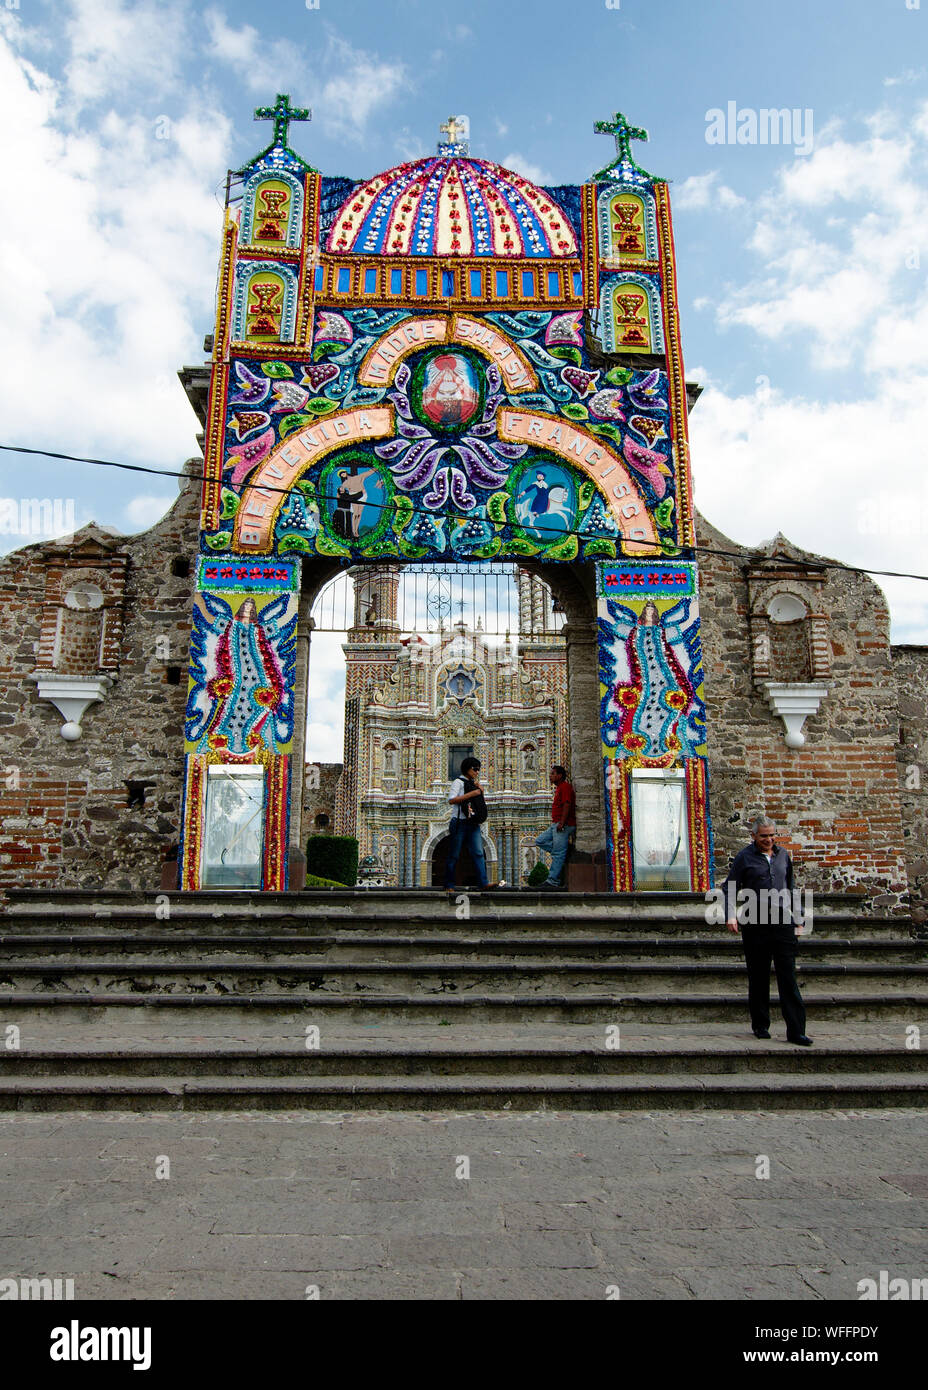 Cholula, Puebla, Mexico - 2019: The Temple of San Francisco Acatepec is a religious monument typical of the Mexican baroque architecture. Stock Photo